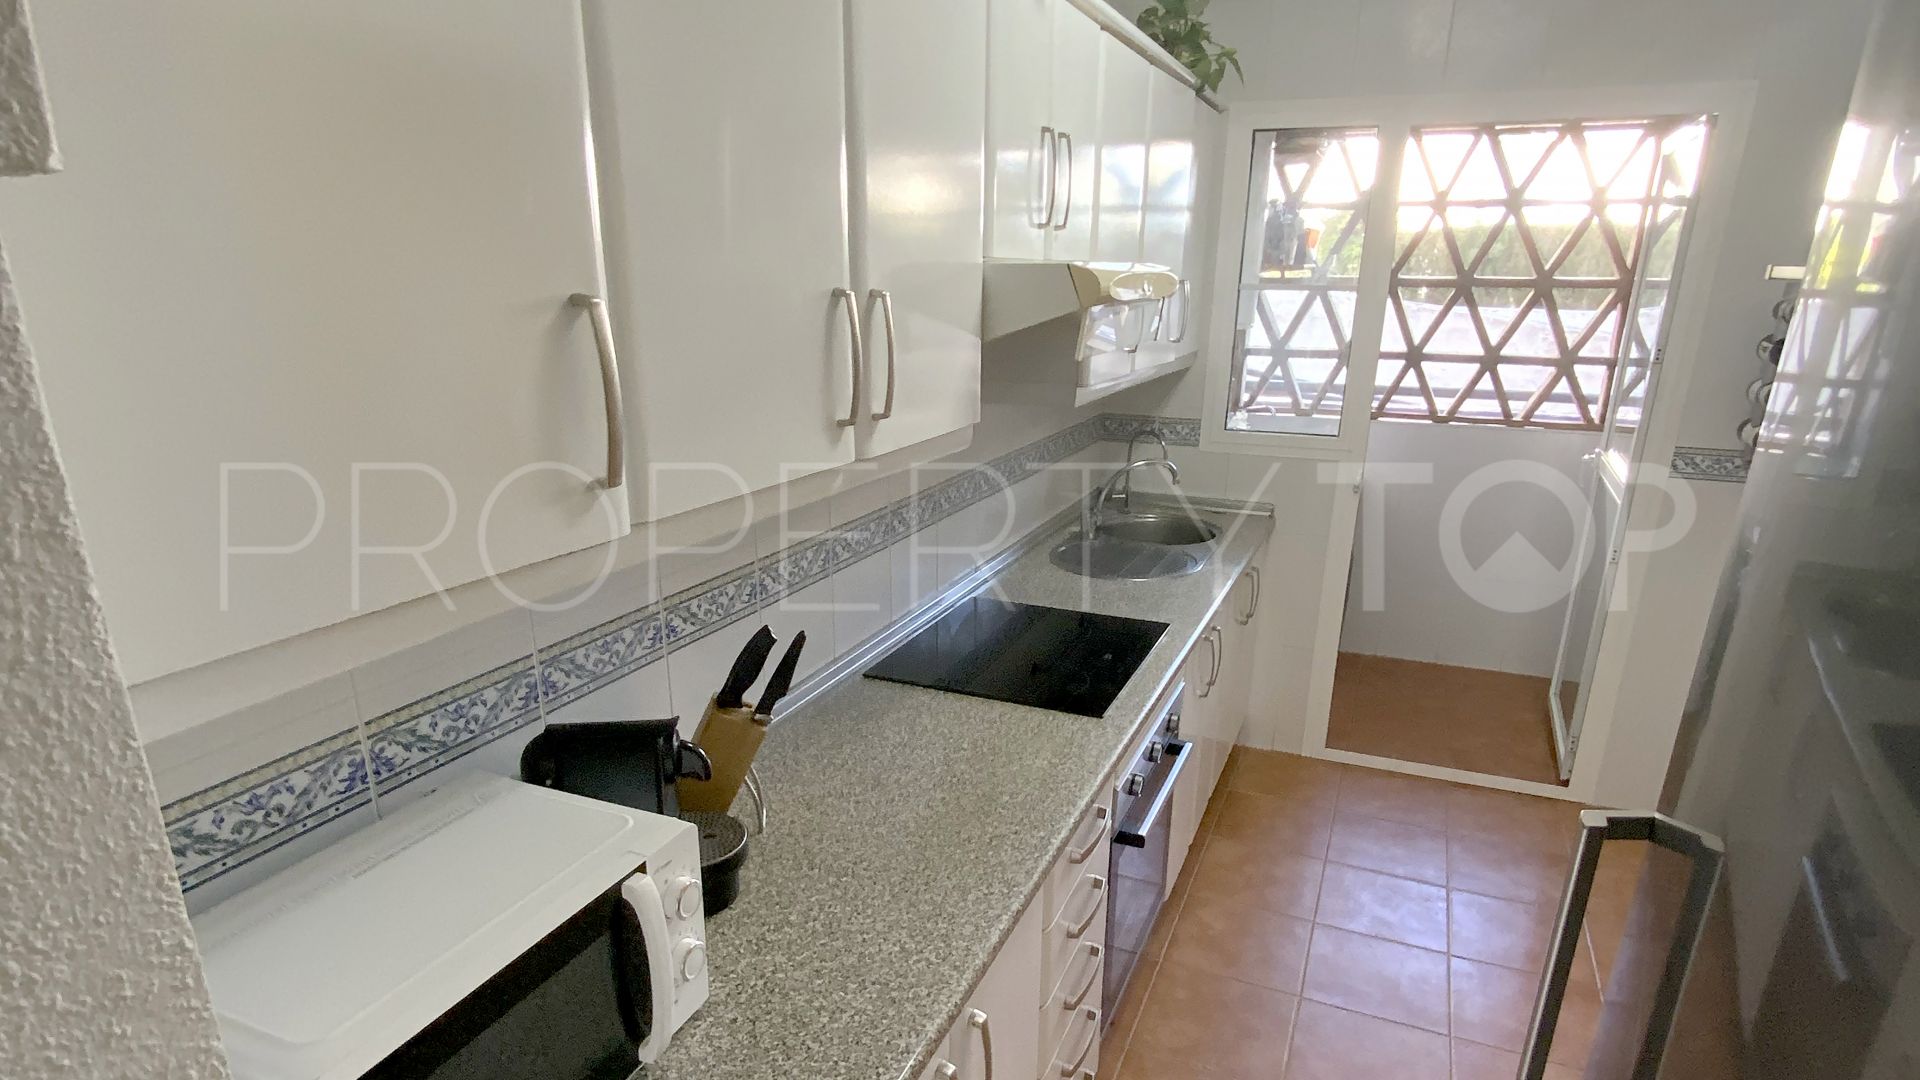 Flat for sale in Mijas Golf with 2 bedrooms